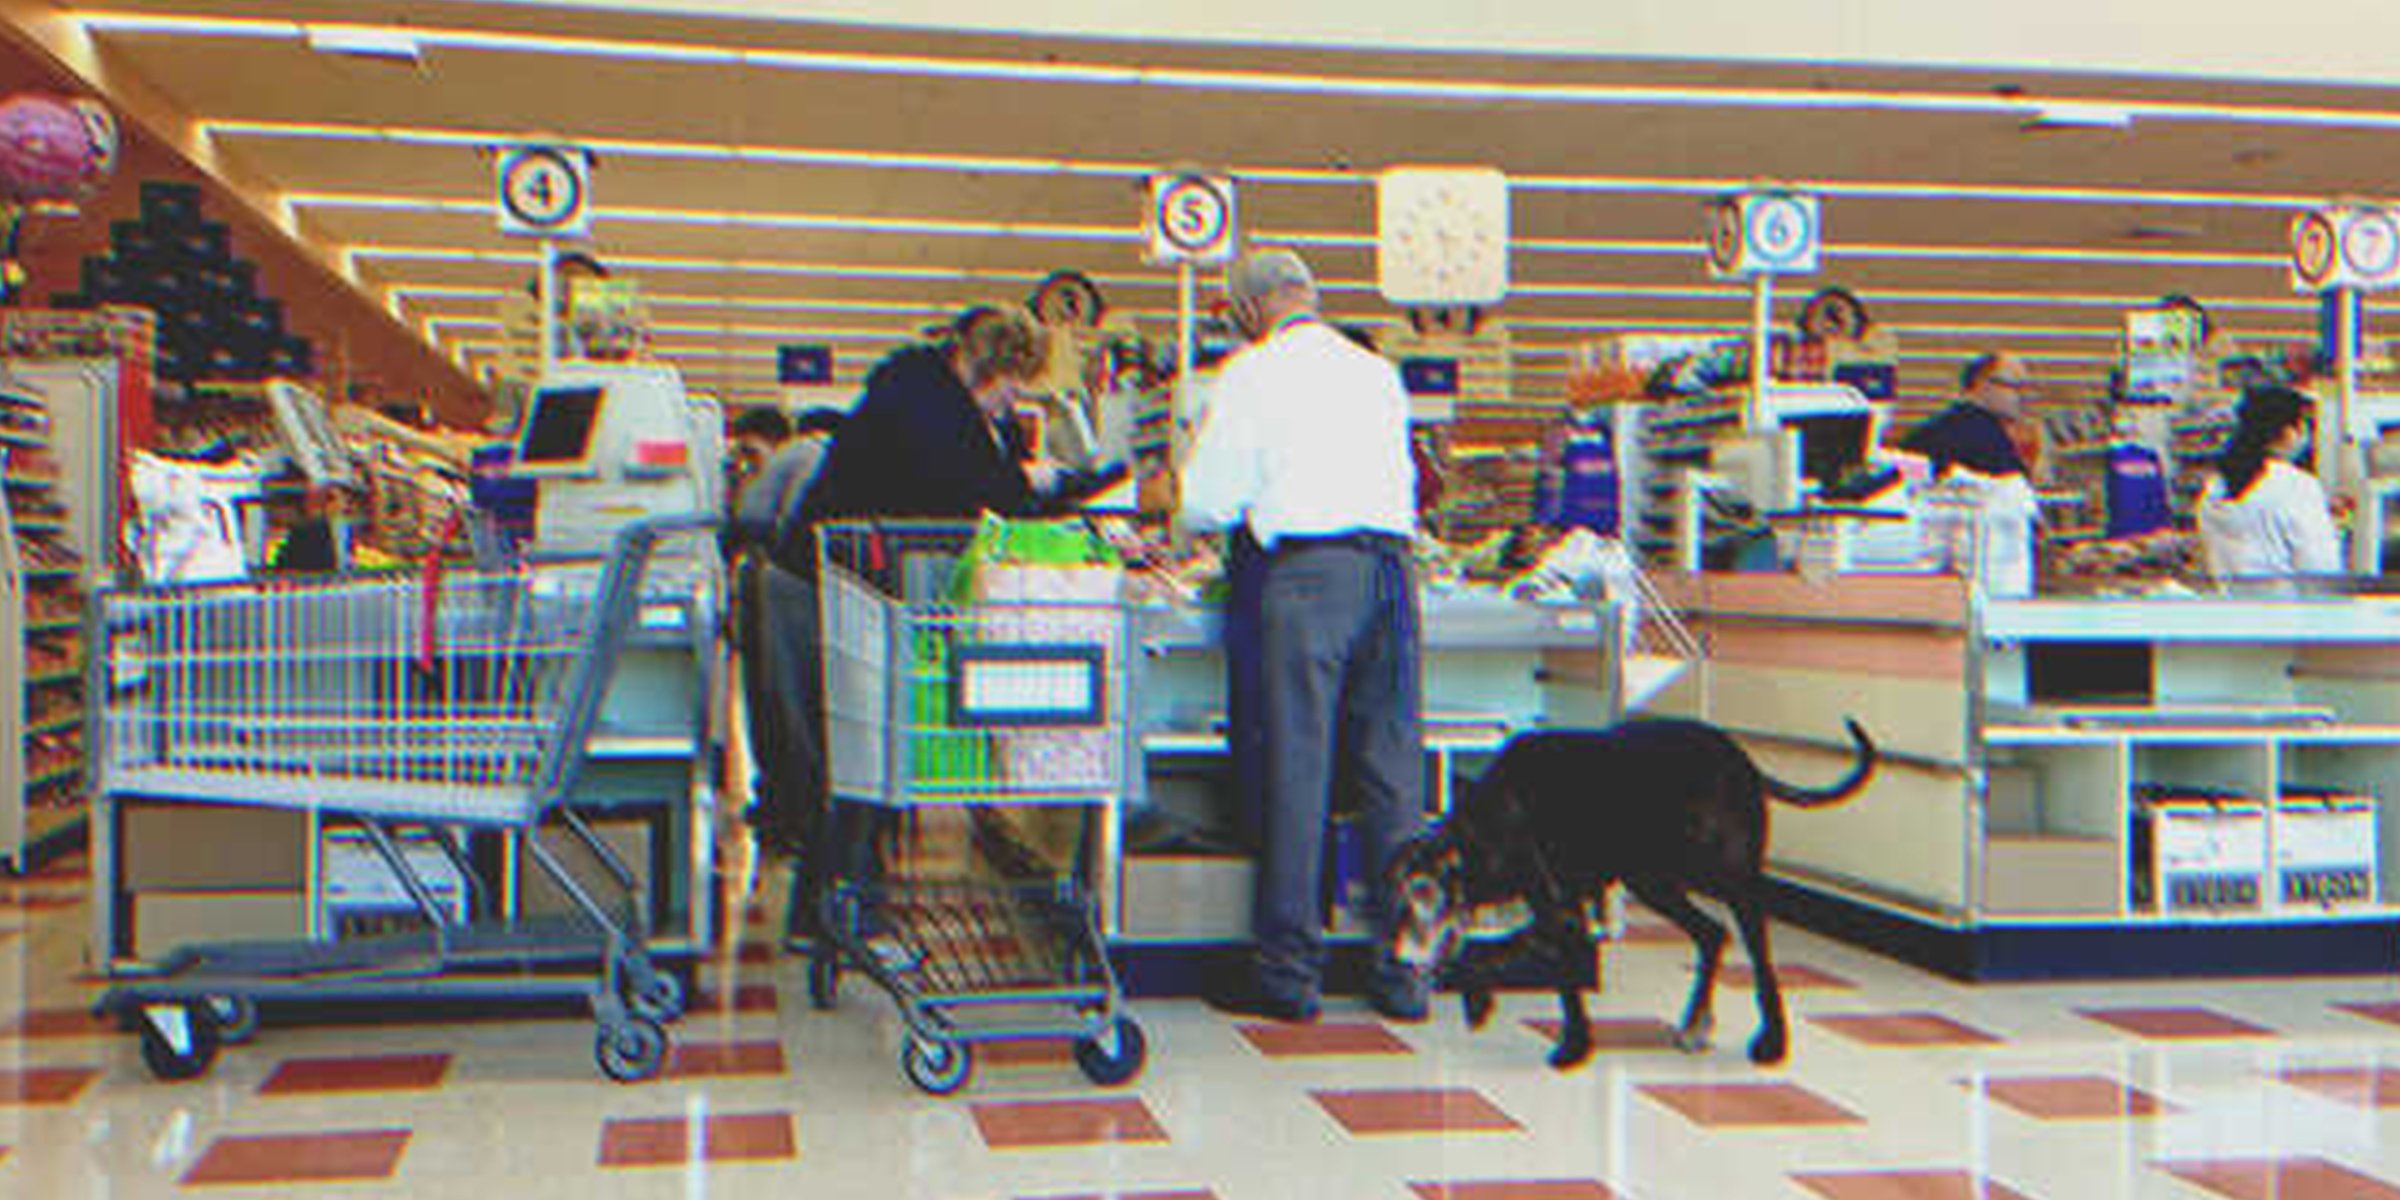 A man and his dog in a supermarket | Source: Shutterstock